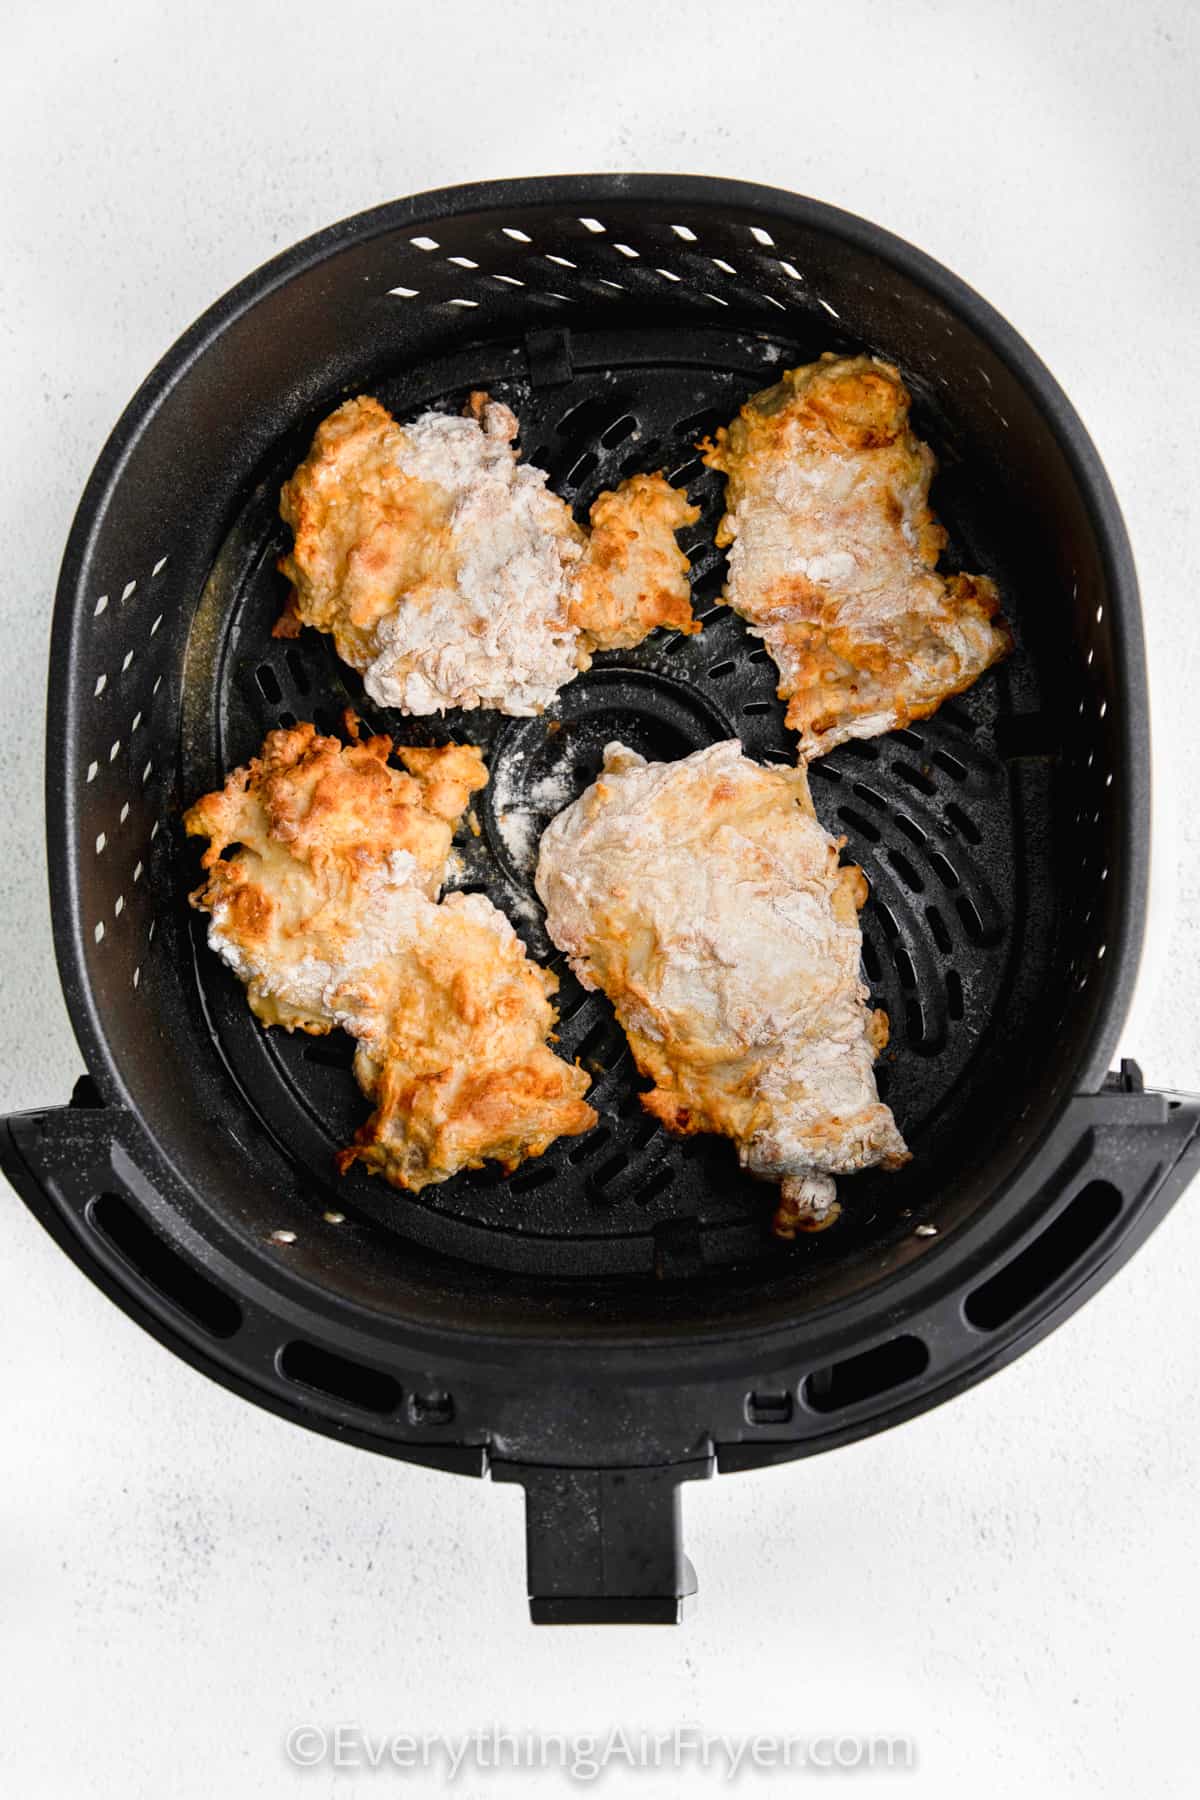 cooked chicken in the fryer to make Air Fryer Chicken and Waffles